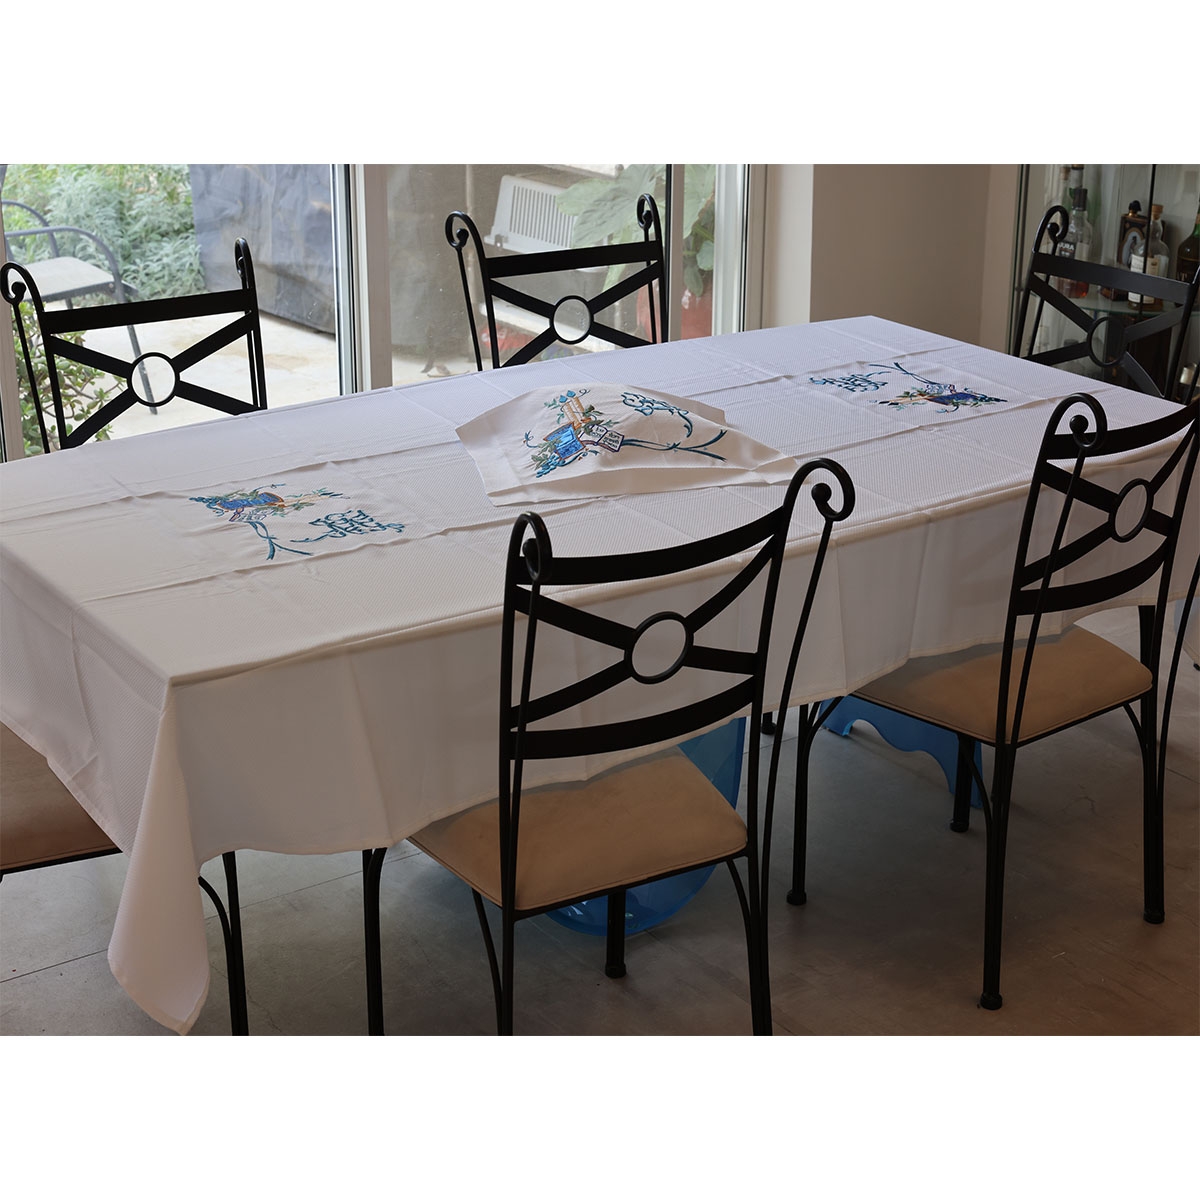 Stain Resistant Blue Embroidery-on-Both-Ends Shabbat Tablecloth Set - 1